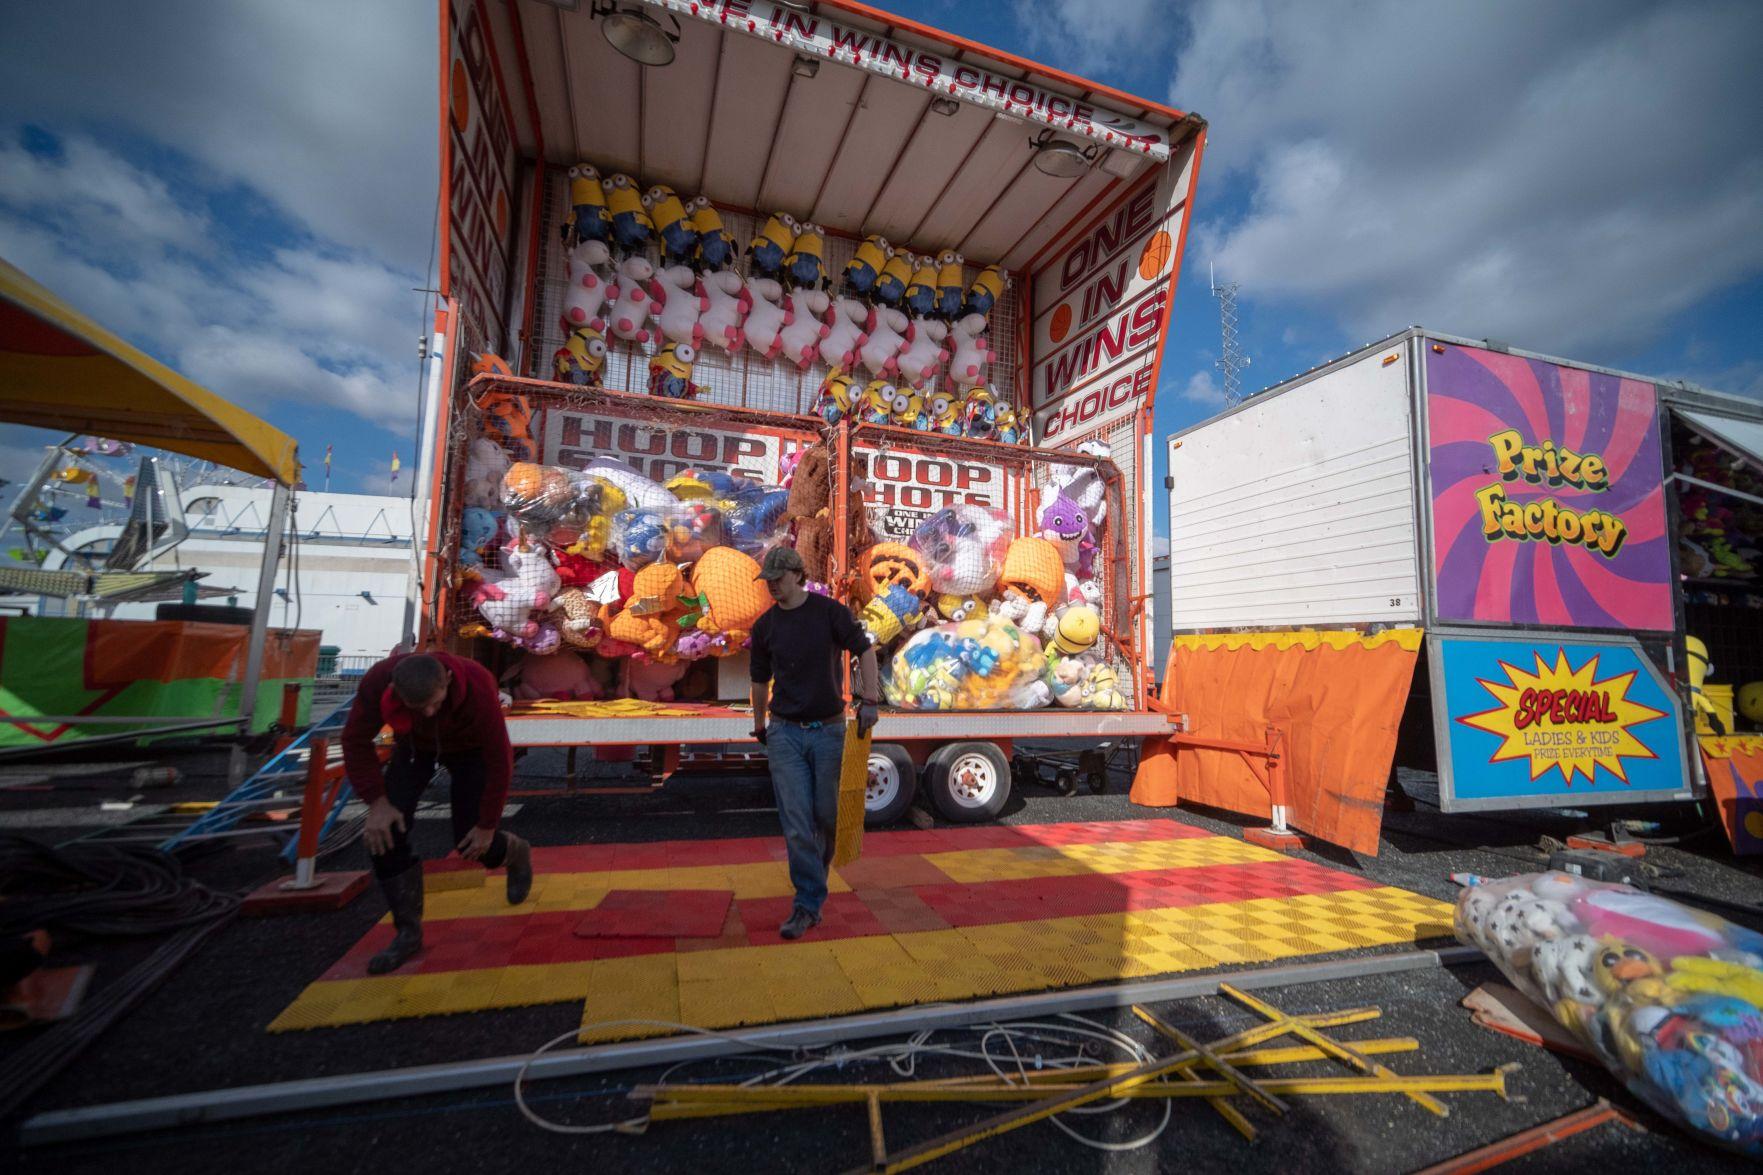 The carnival is back in Killeen Local News